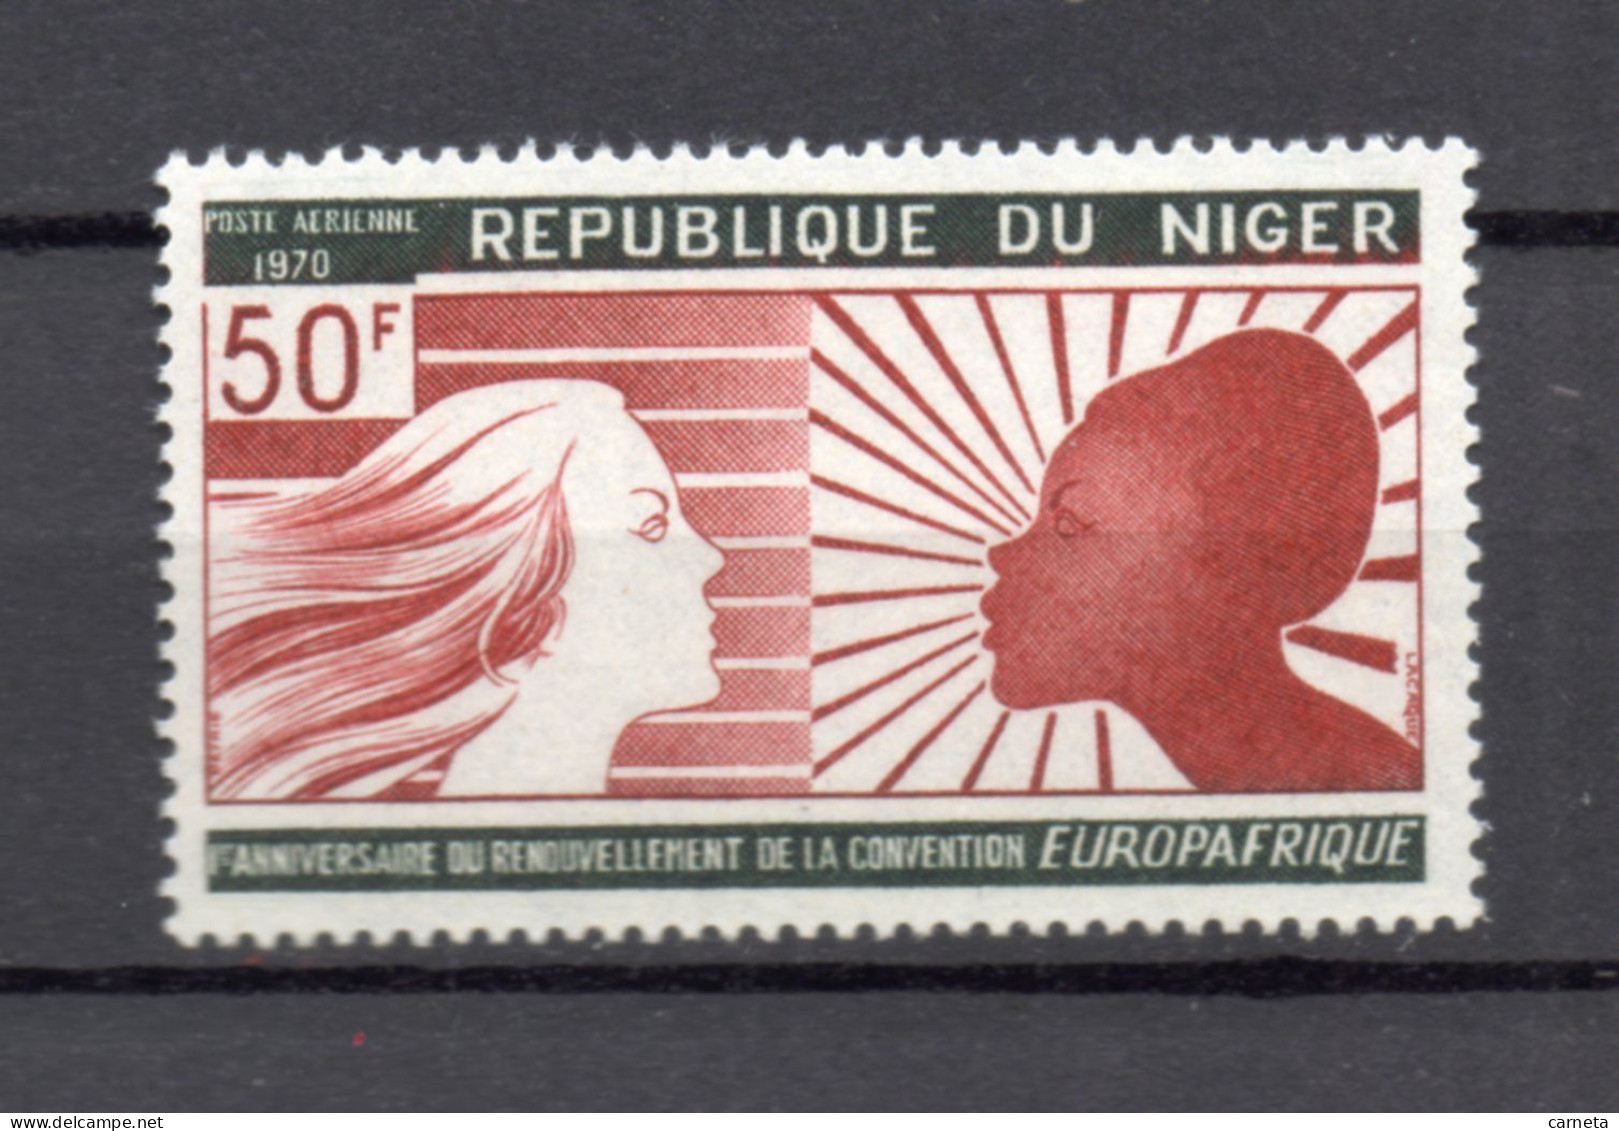 NIGER  PA   N° 134    NEUF SANS CHARNIERE  COTE 1.20€    EUROPAFRIQUE - Niger (1960-...)